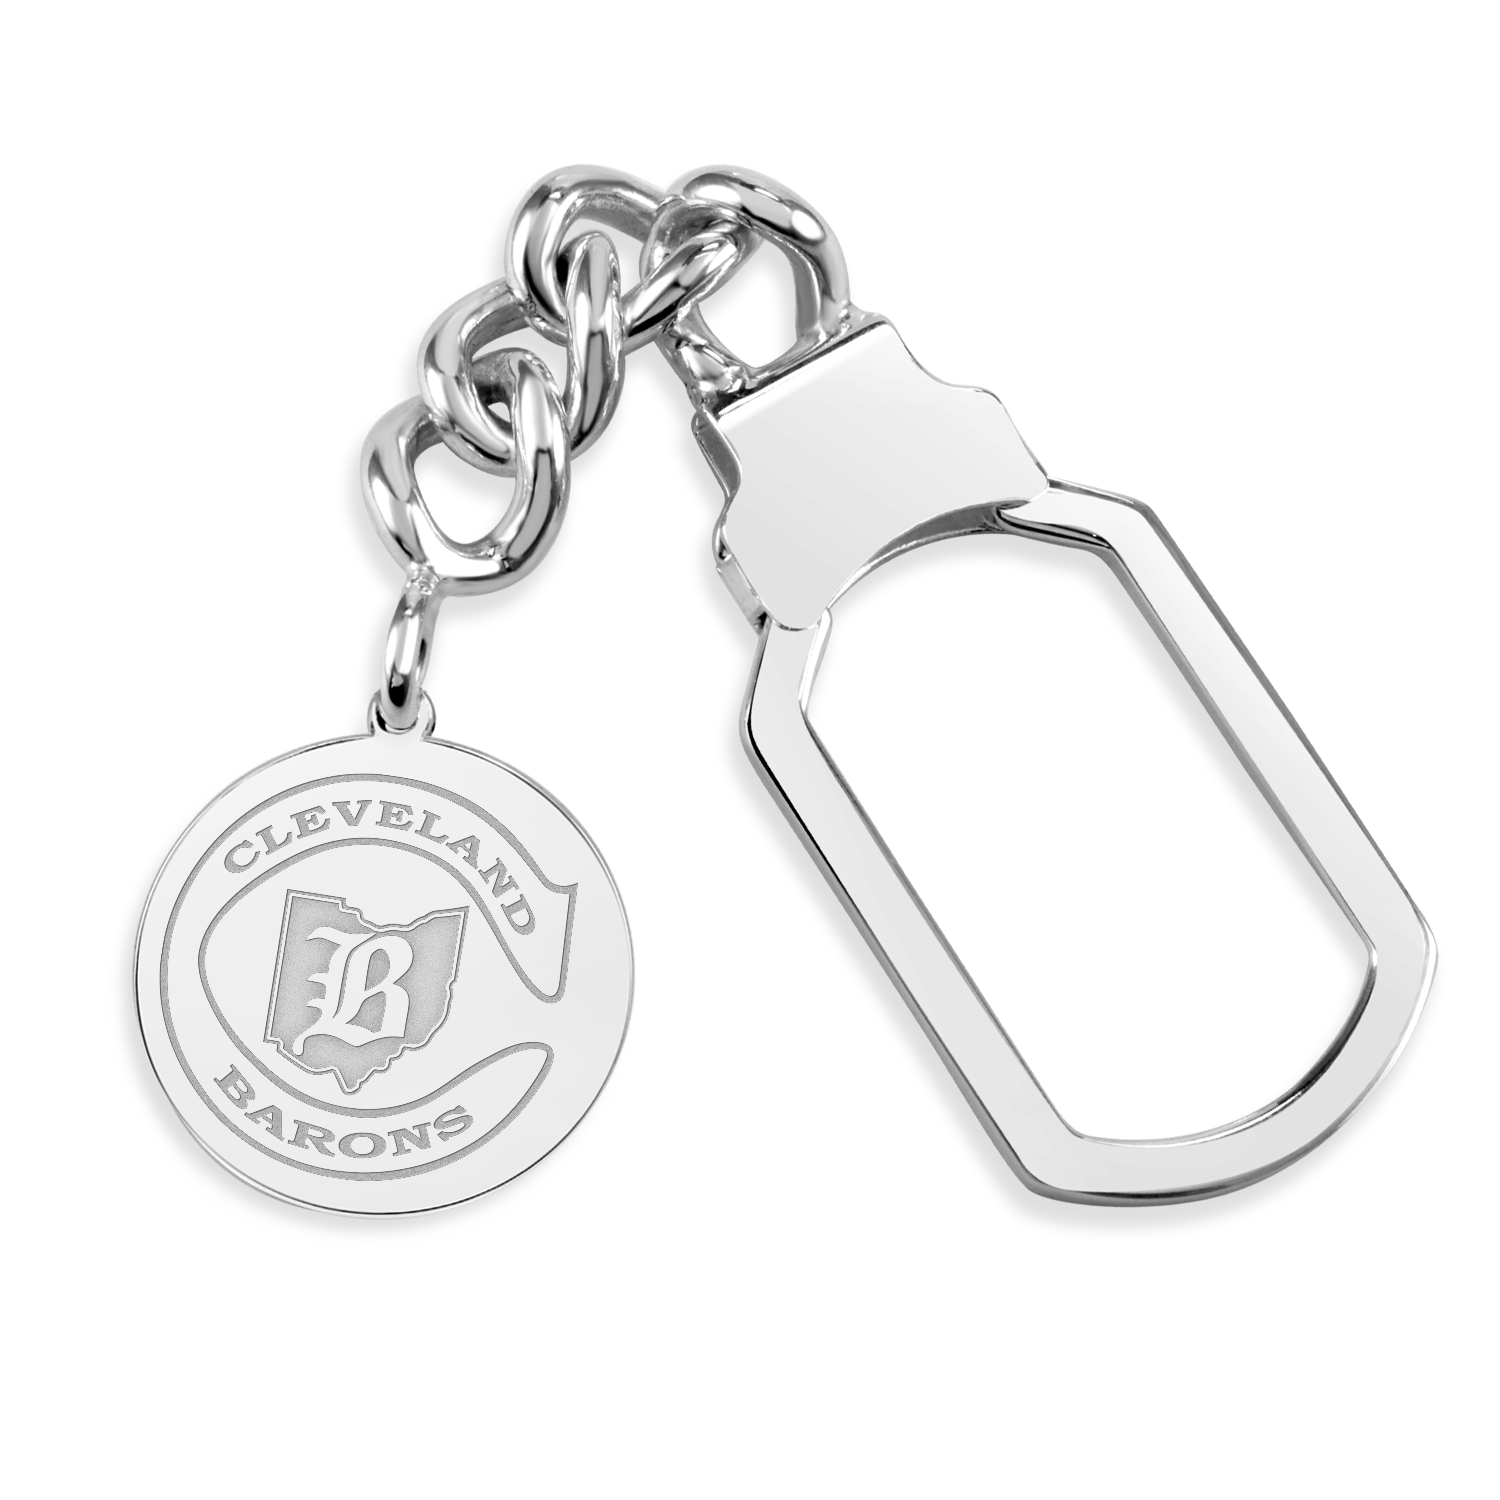 Cleveland Barons Tension Lock Key Chain Disc